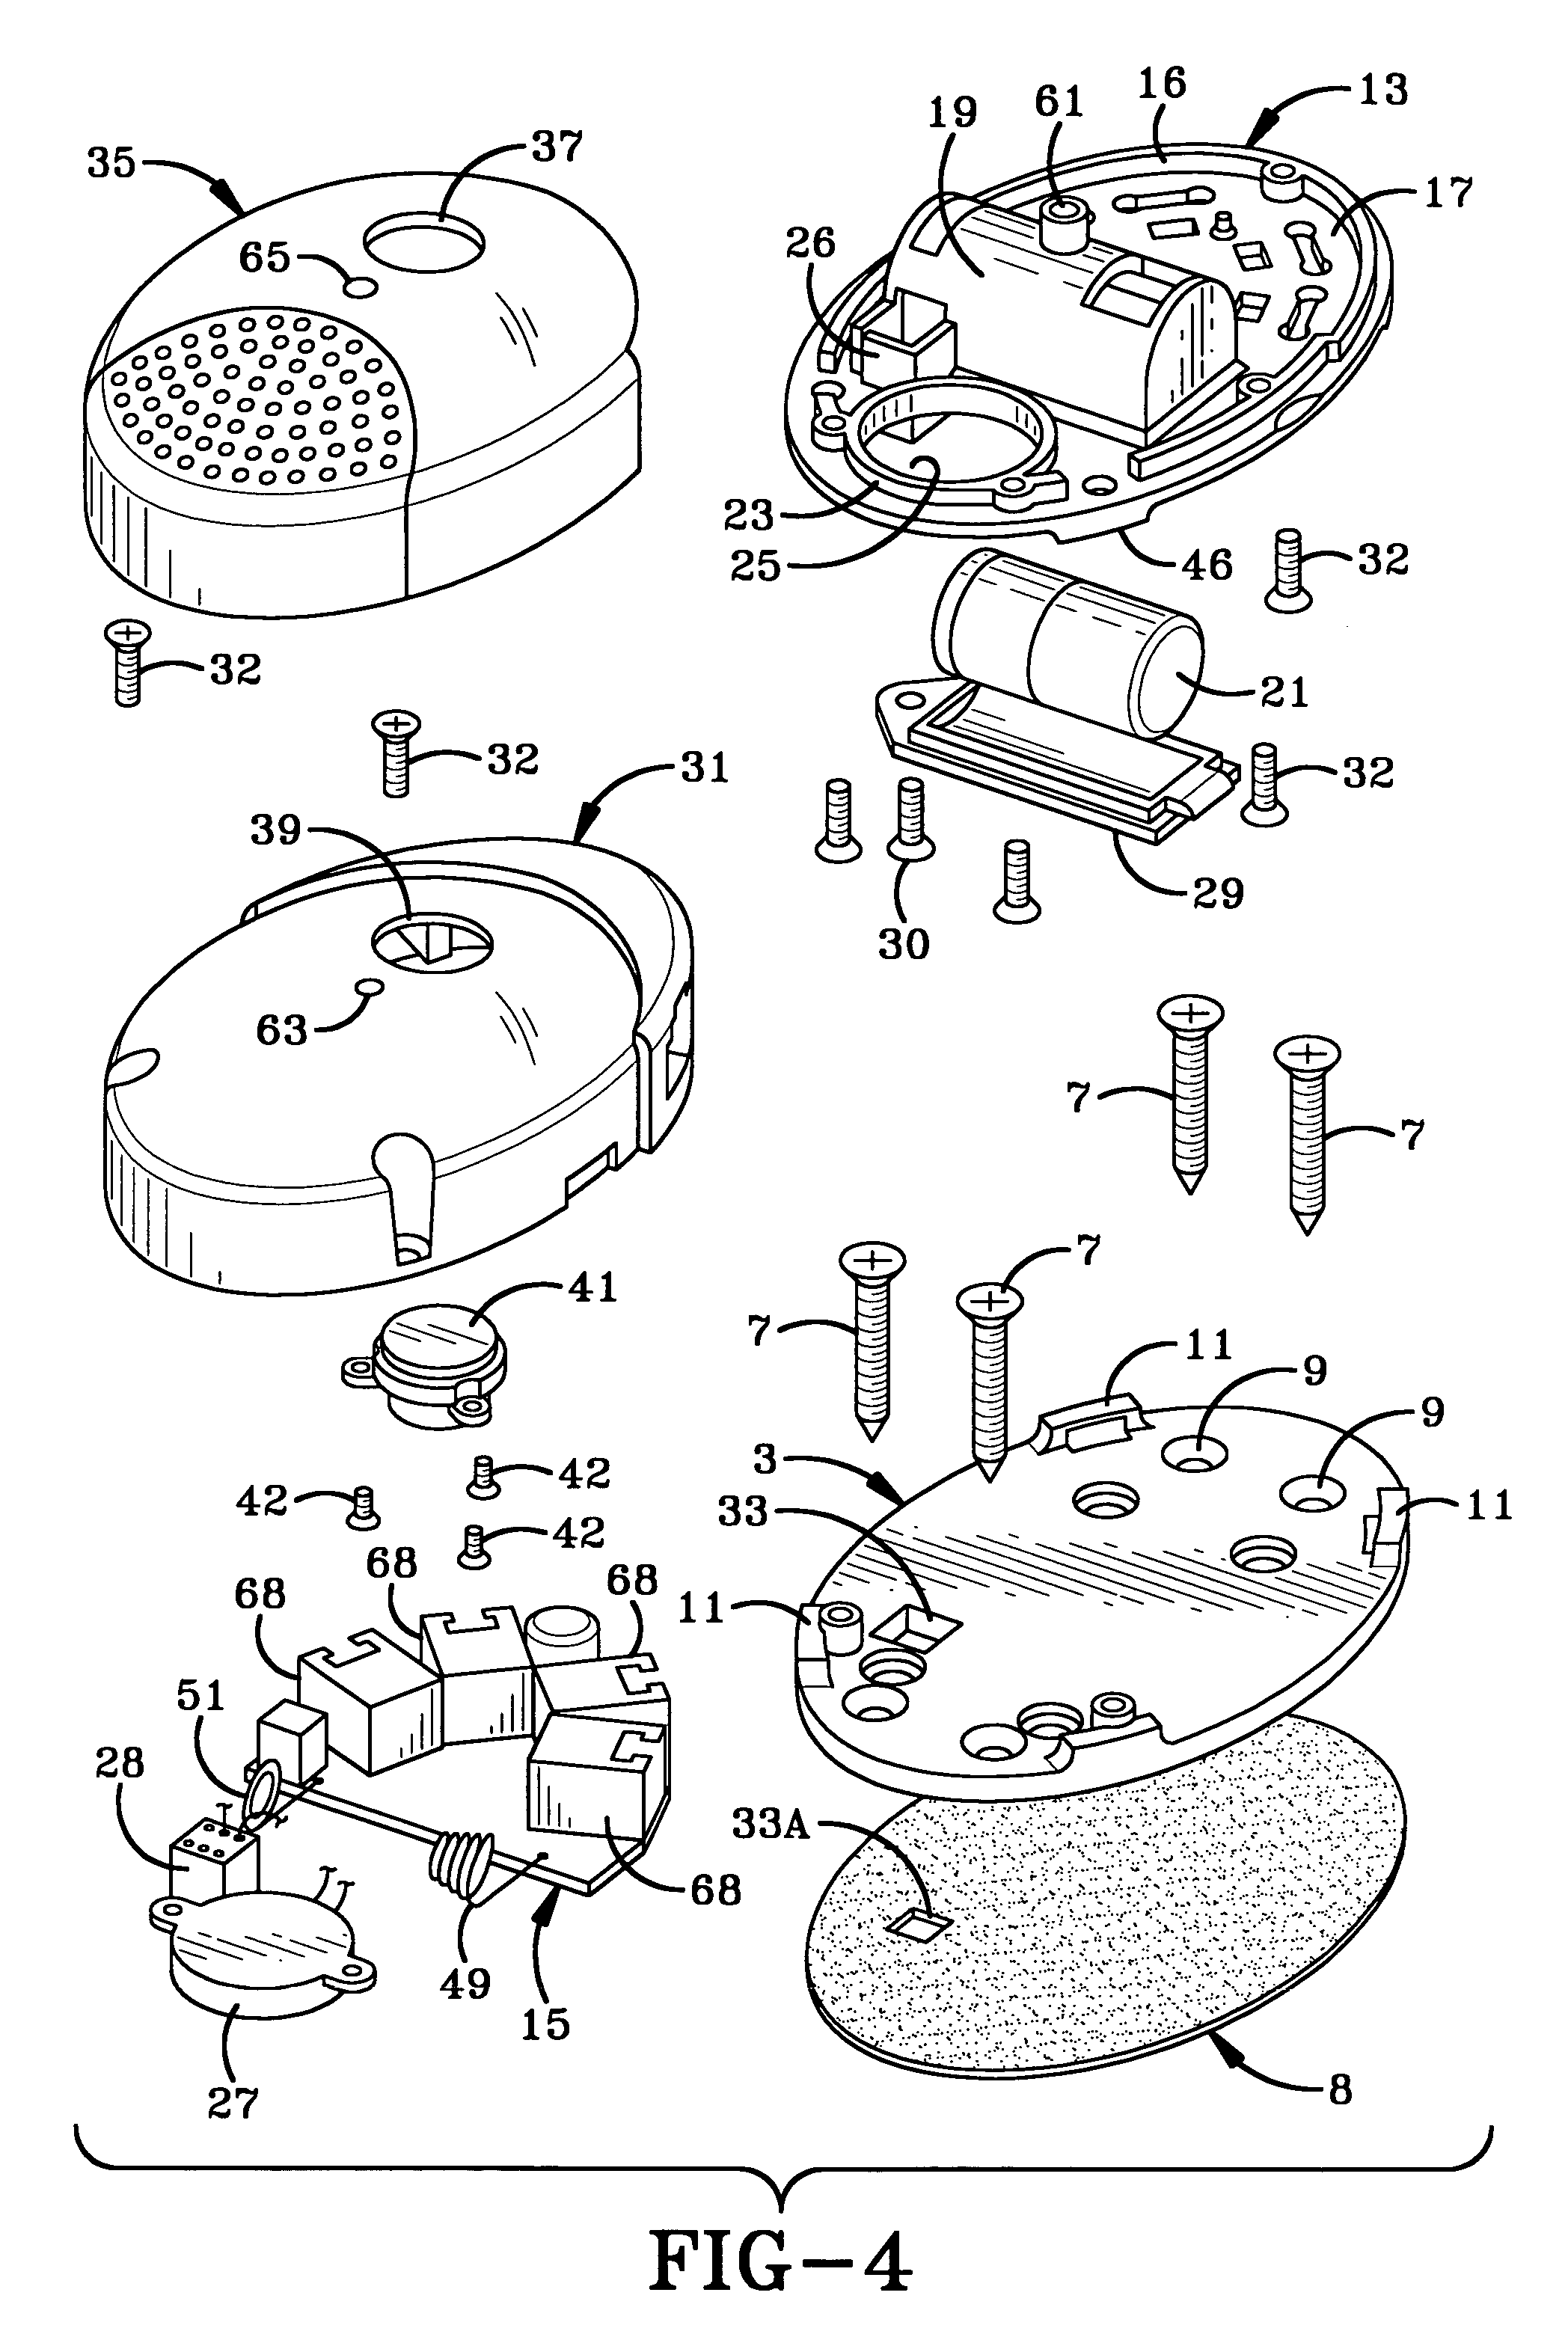 Programmable alarm module and system for protecting merchandise